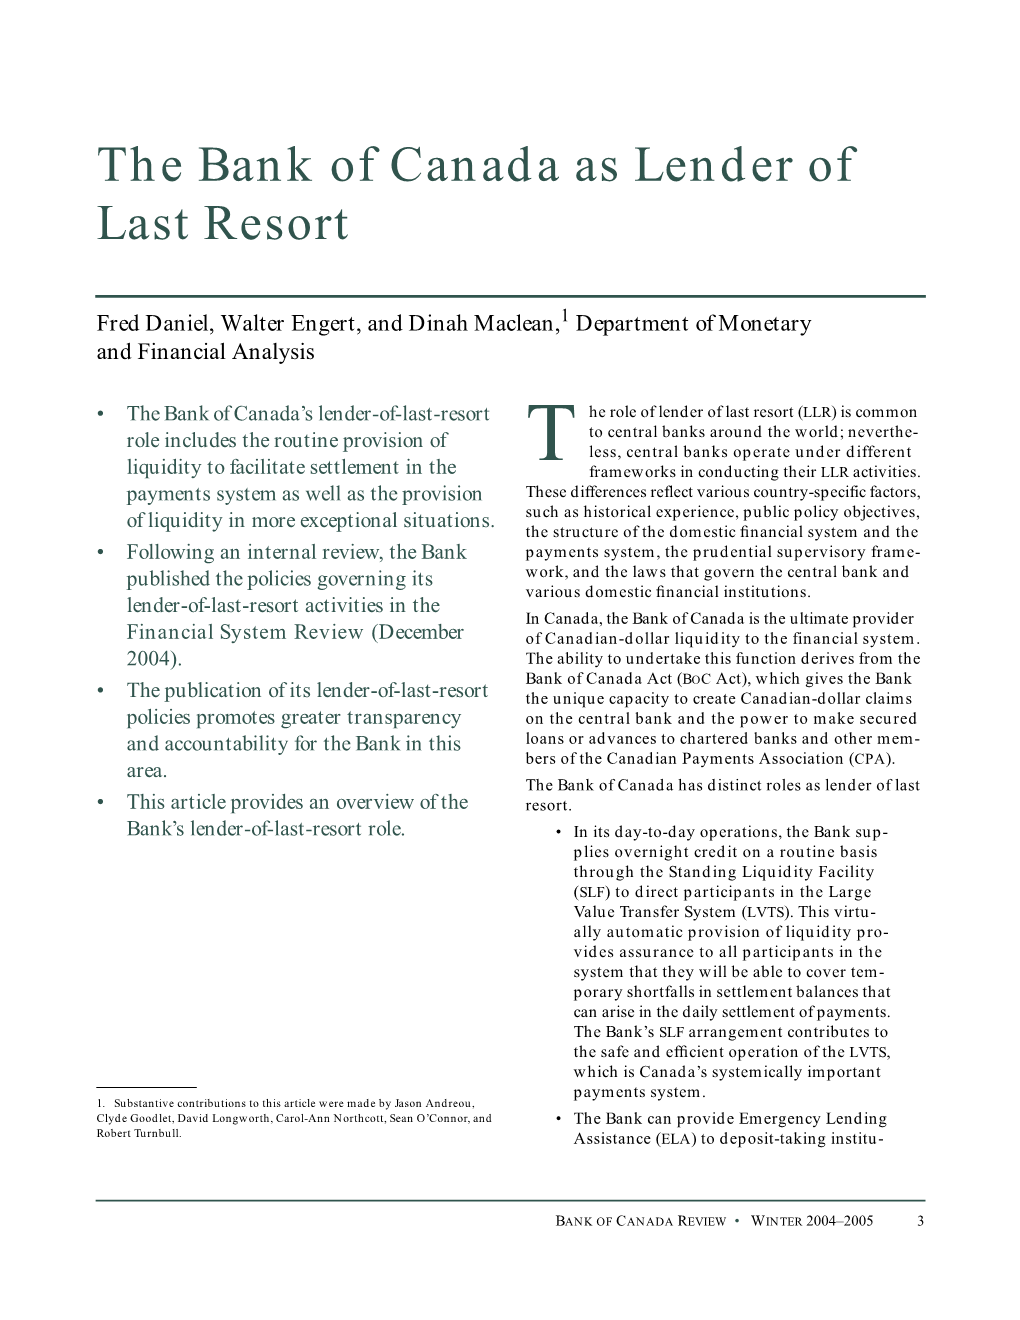 The Bank of Canada As Lender of Last Resort